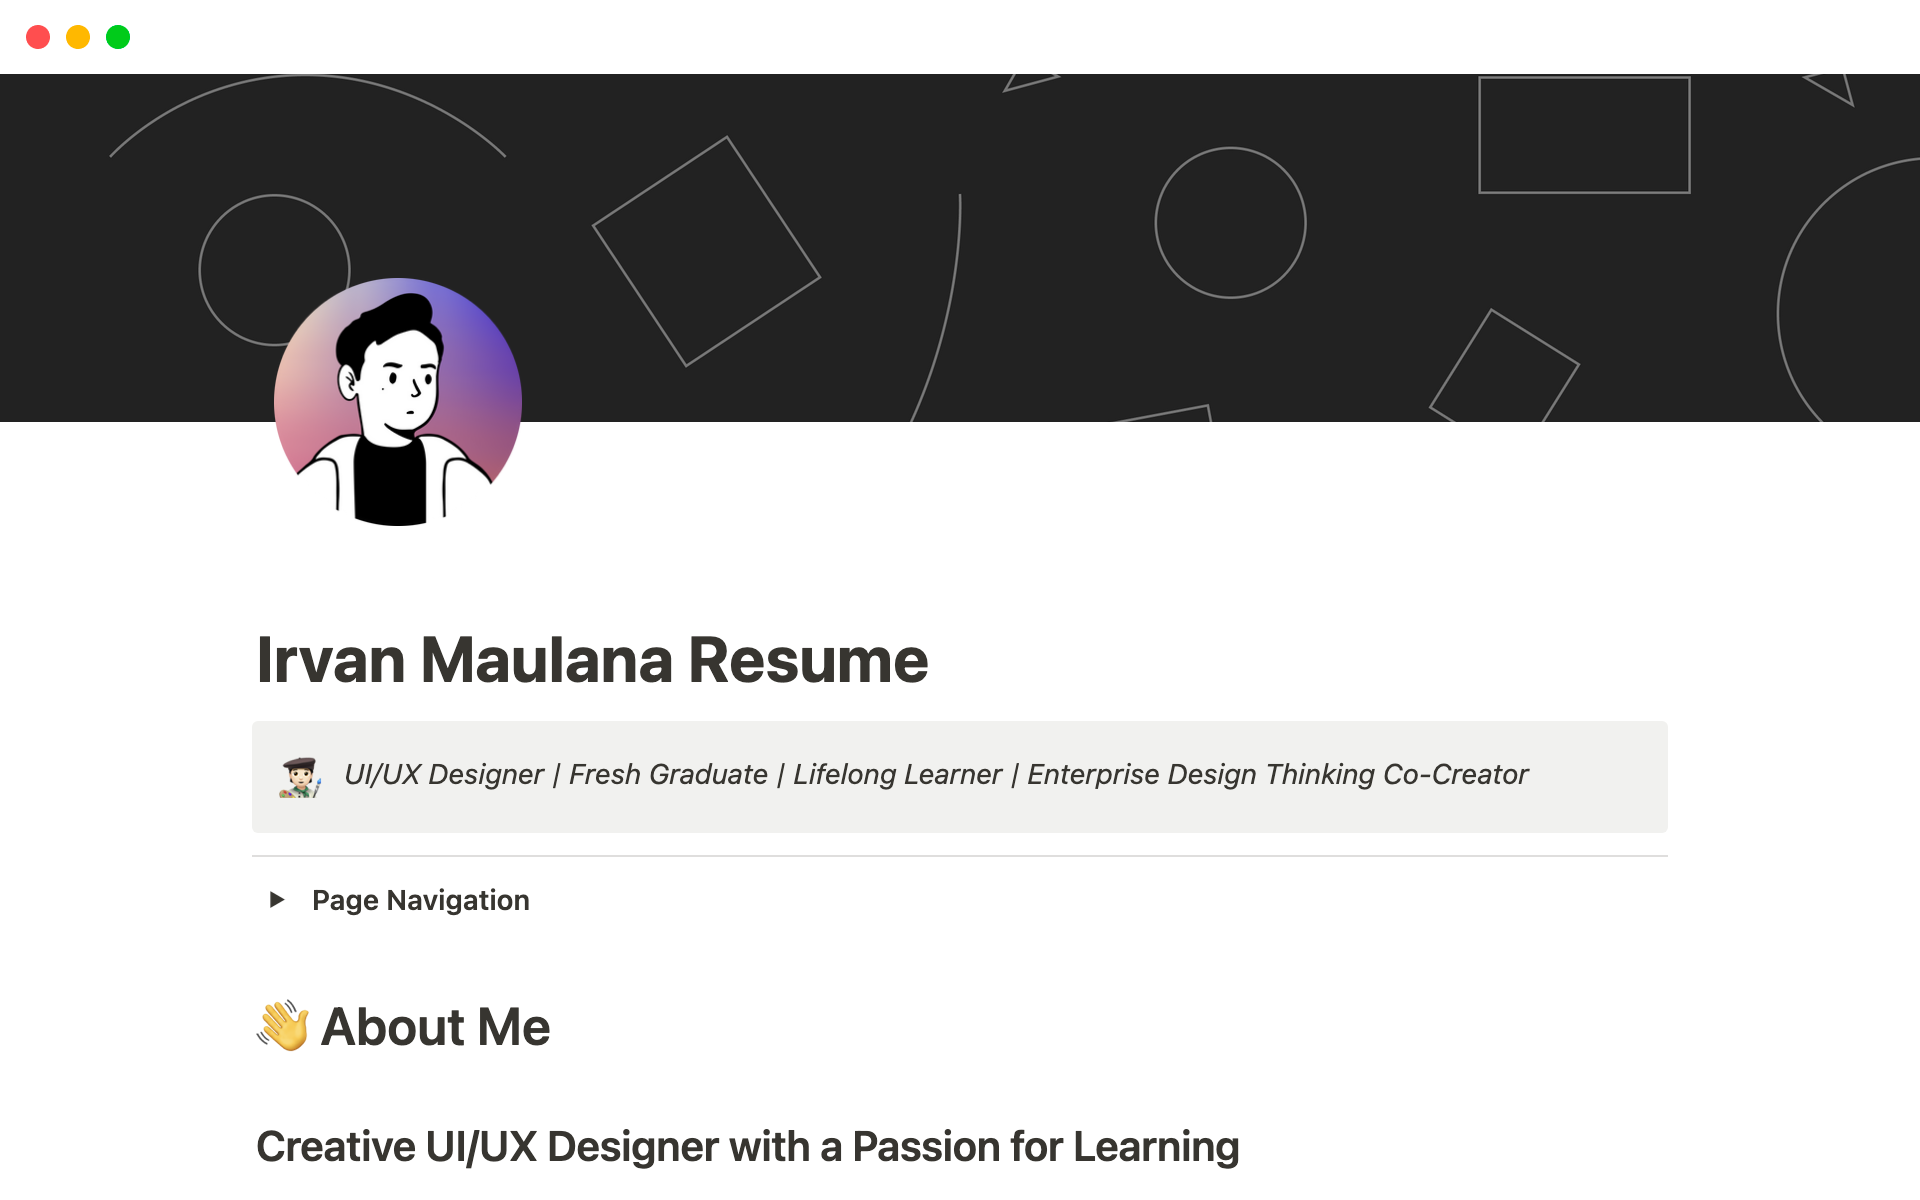 This template is a Notion template for a UI/UX Designer's resume